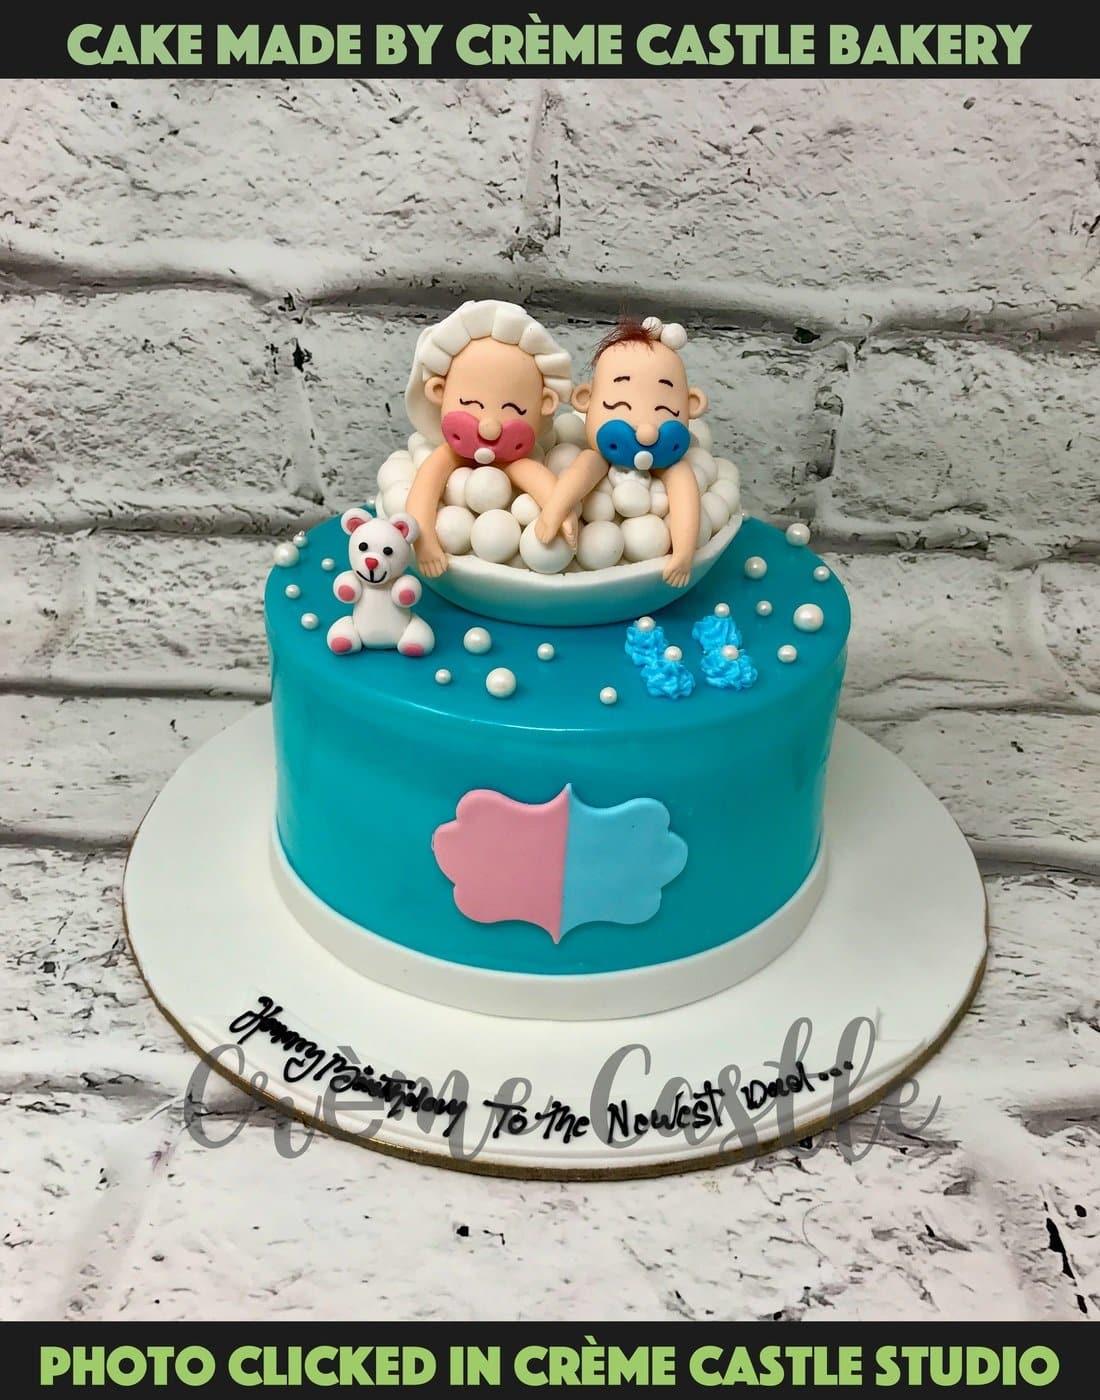 Joint Birthday Cakes - Quality Cake Company